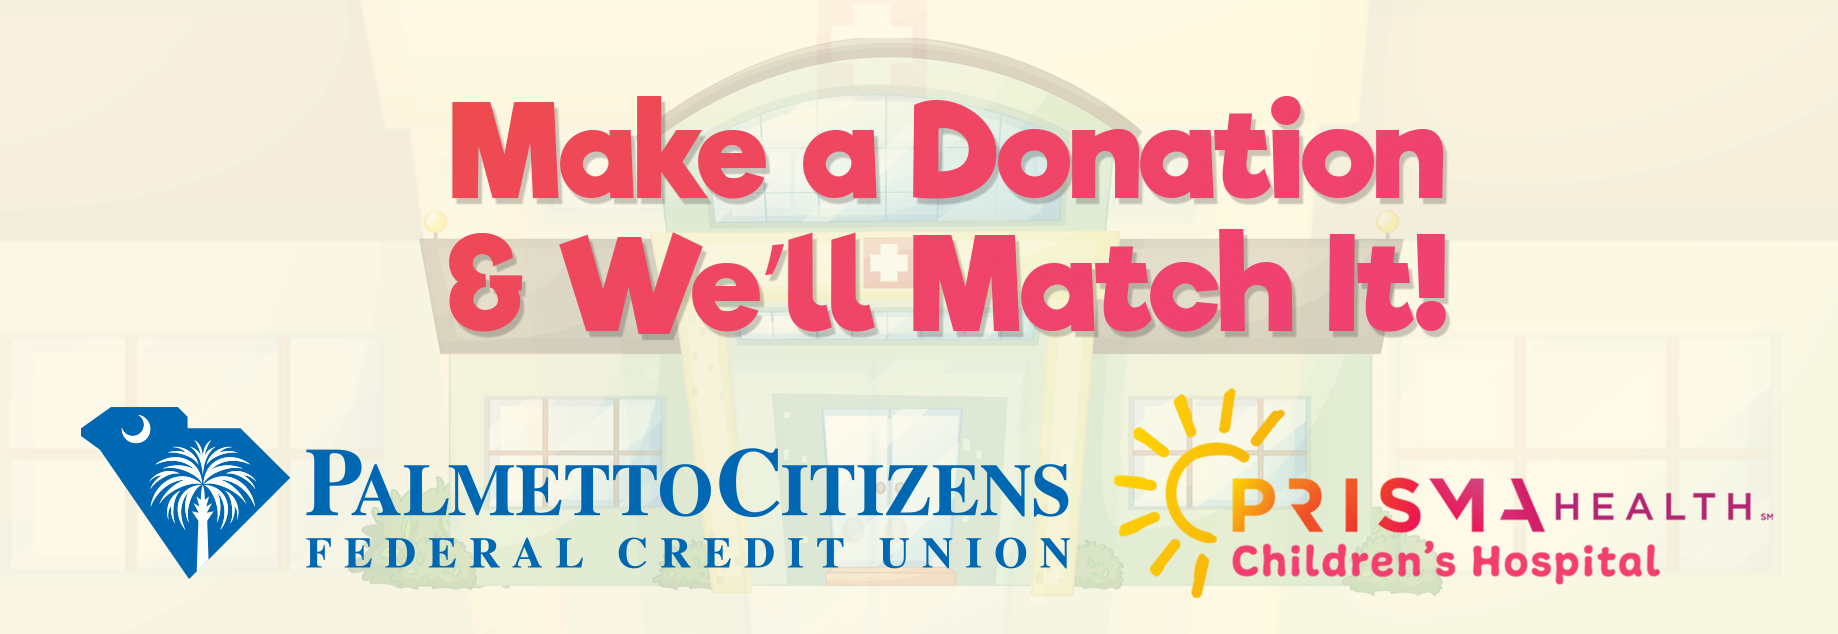 Make a Donation and We'll Match It!